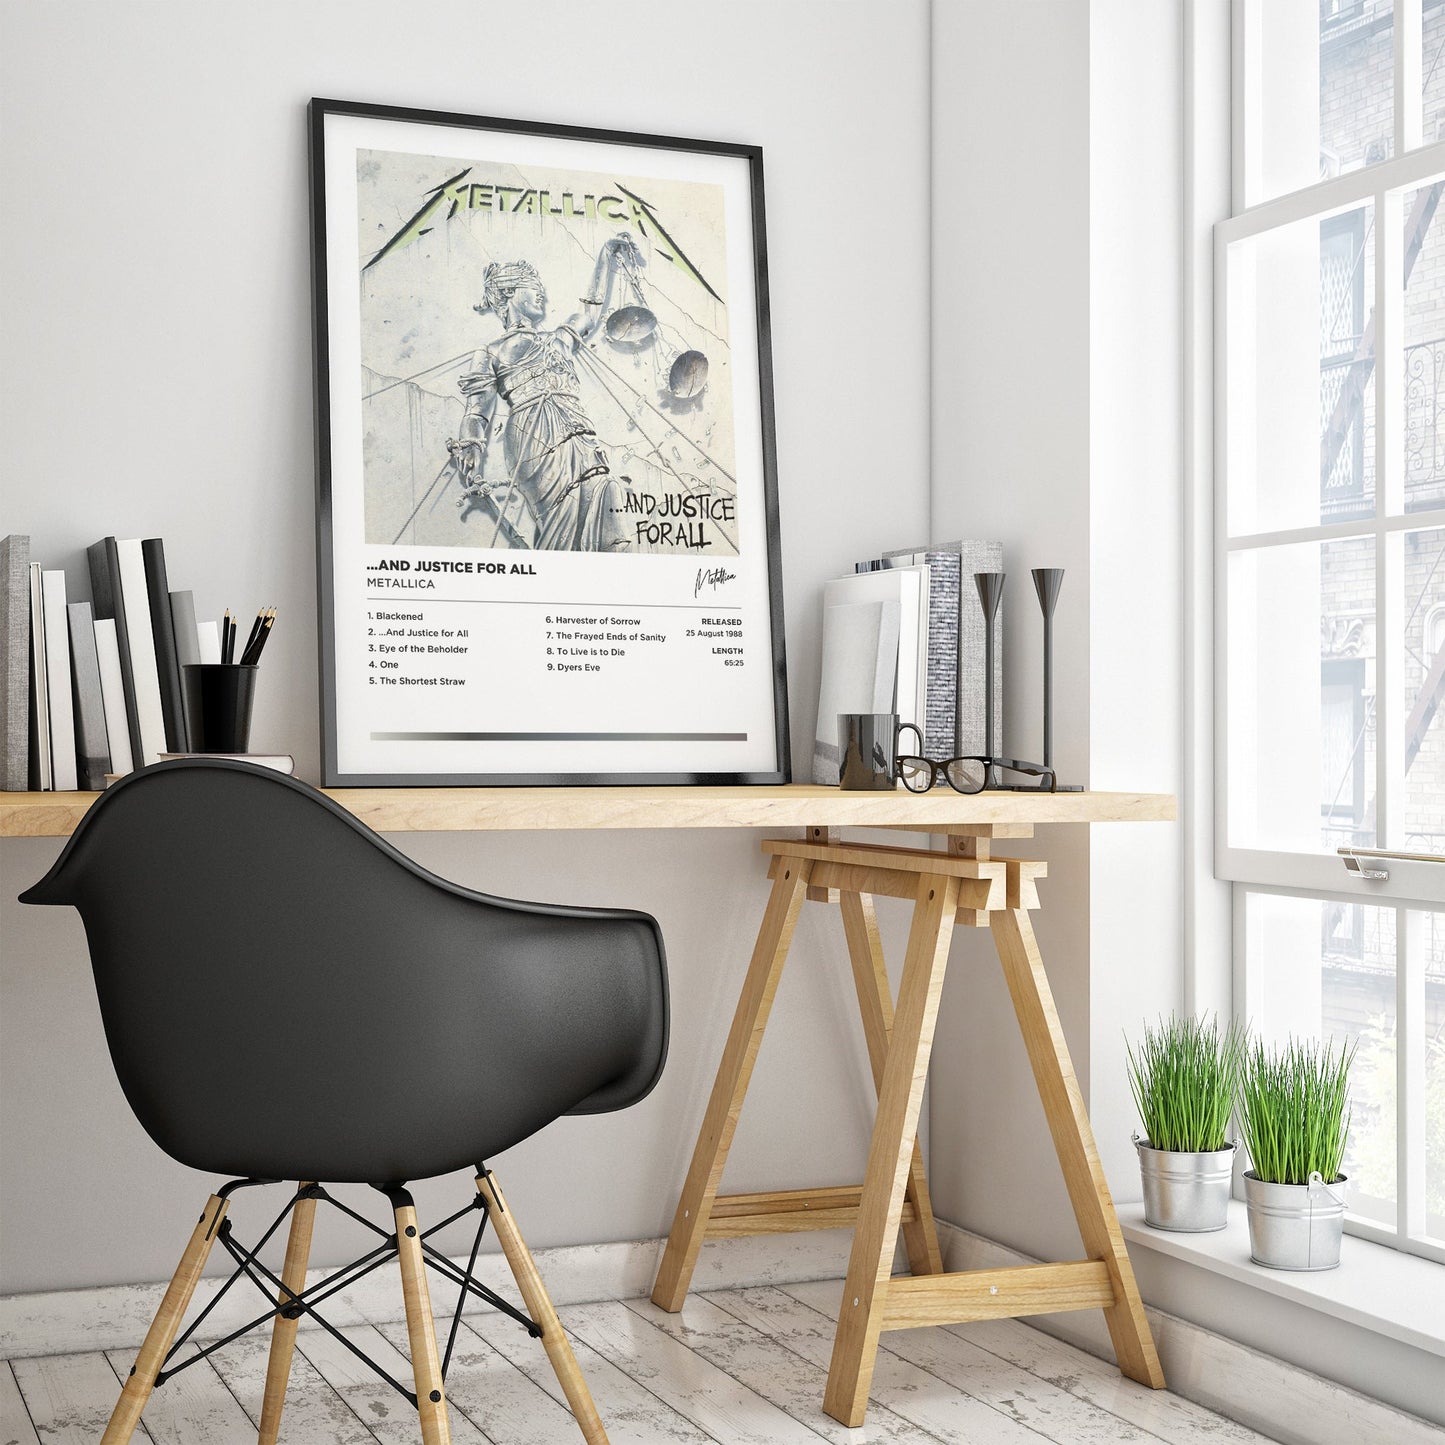 Metallica - And Justice for All Framed Poster Print | Polaroid Style | Album Cover Artwork